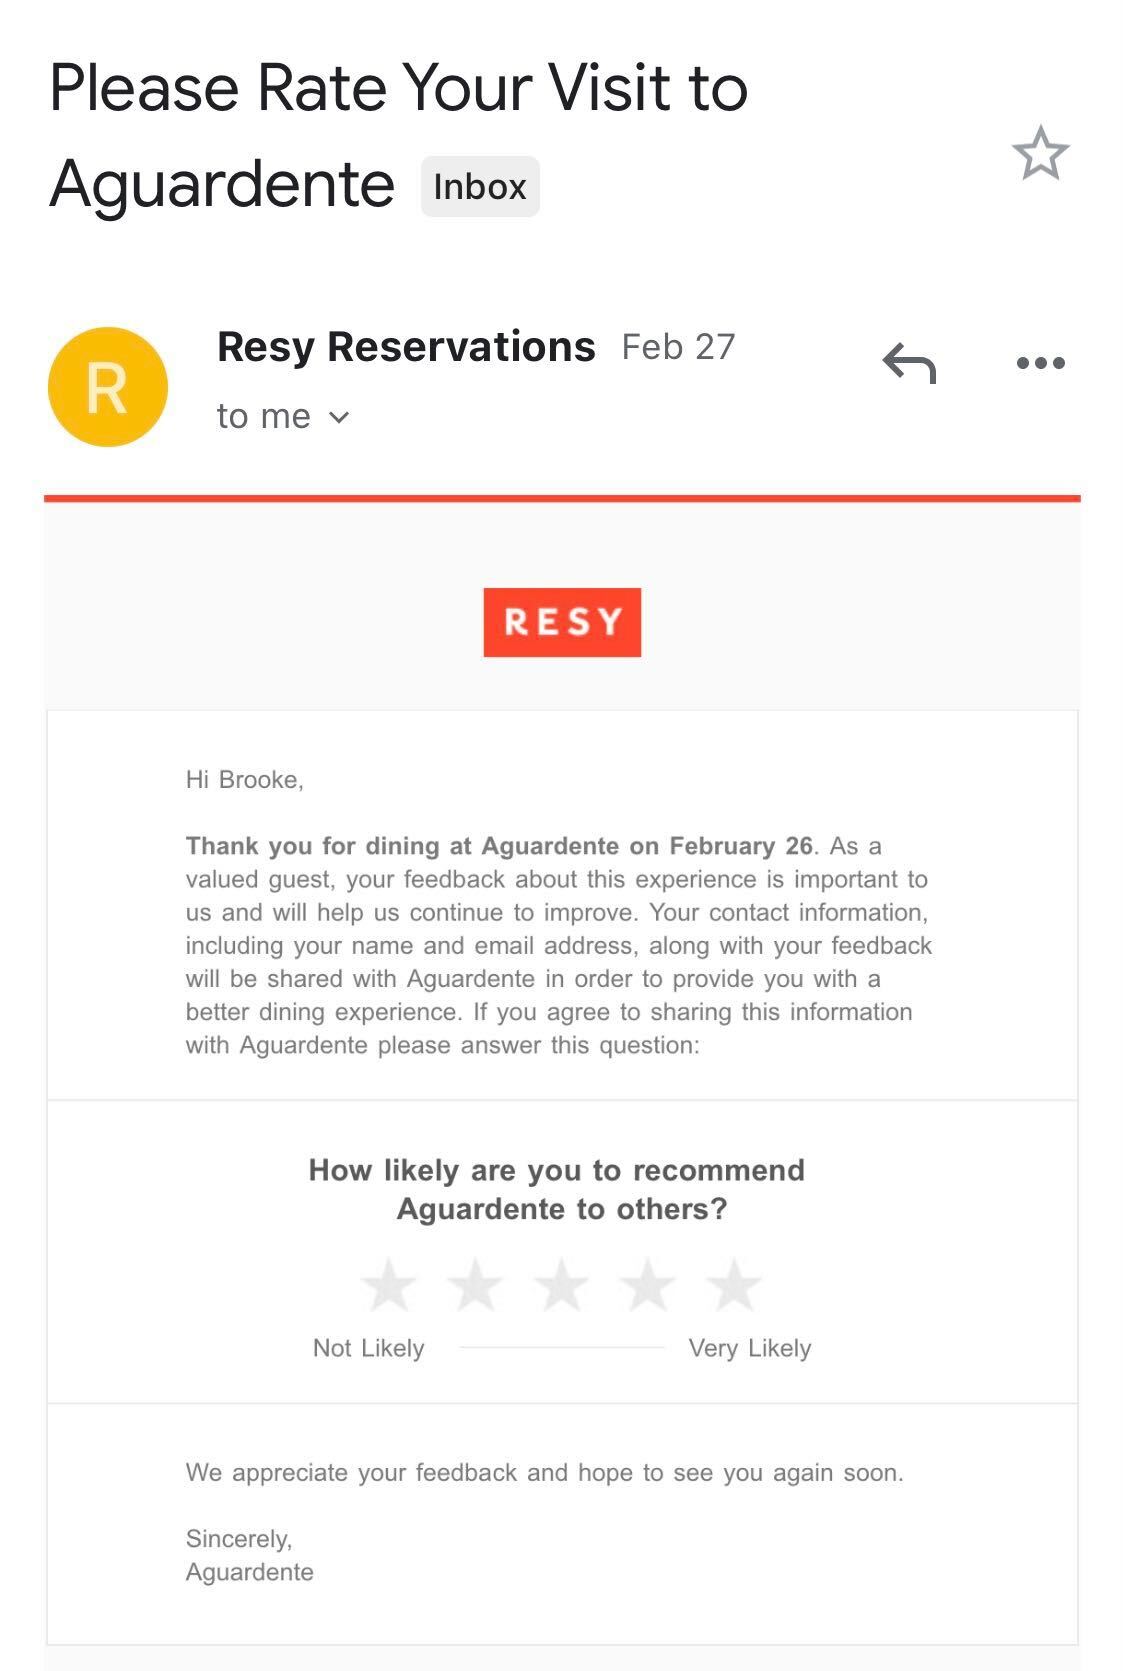 Resy collects post-purchase zero-party data via survey